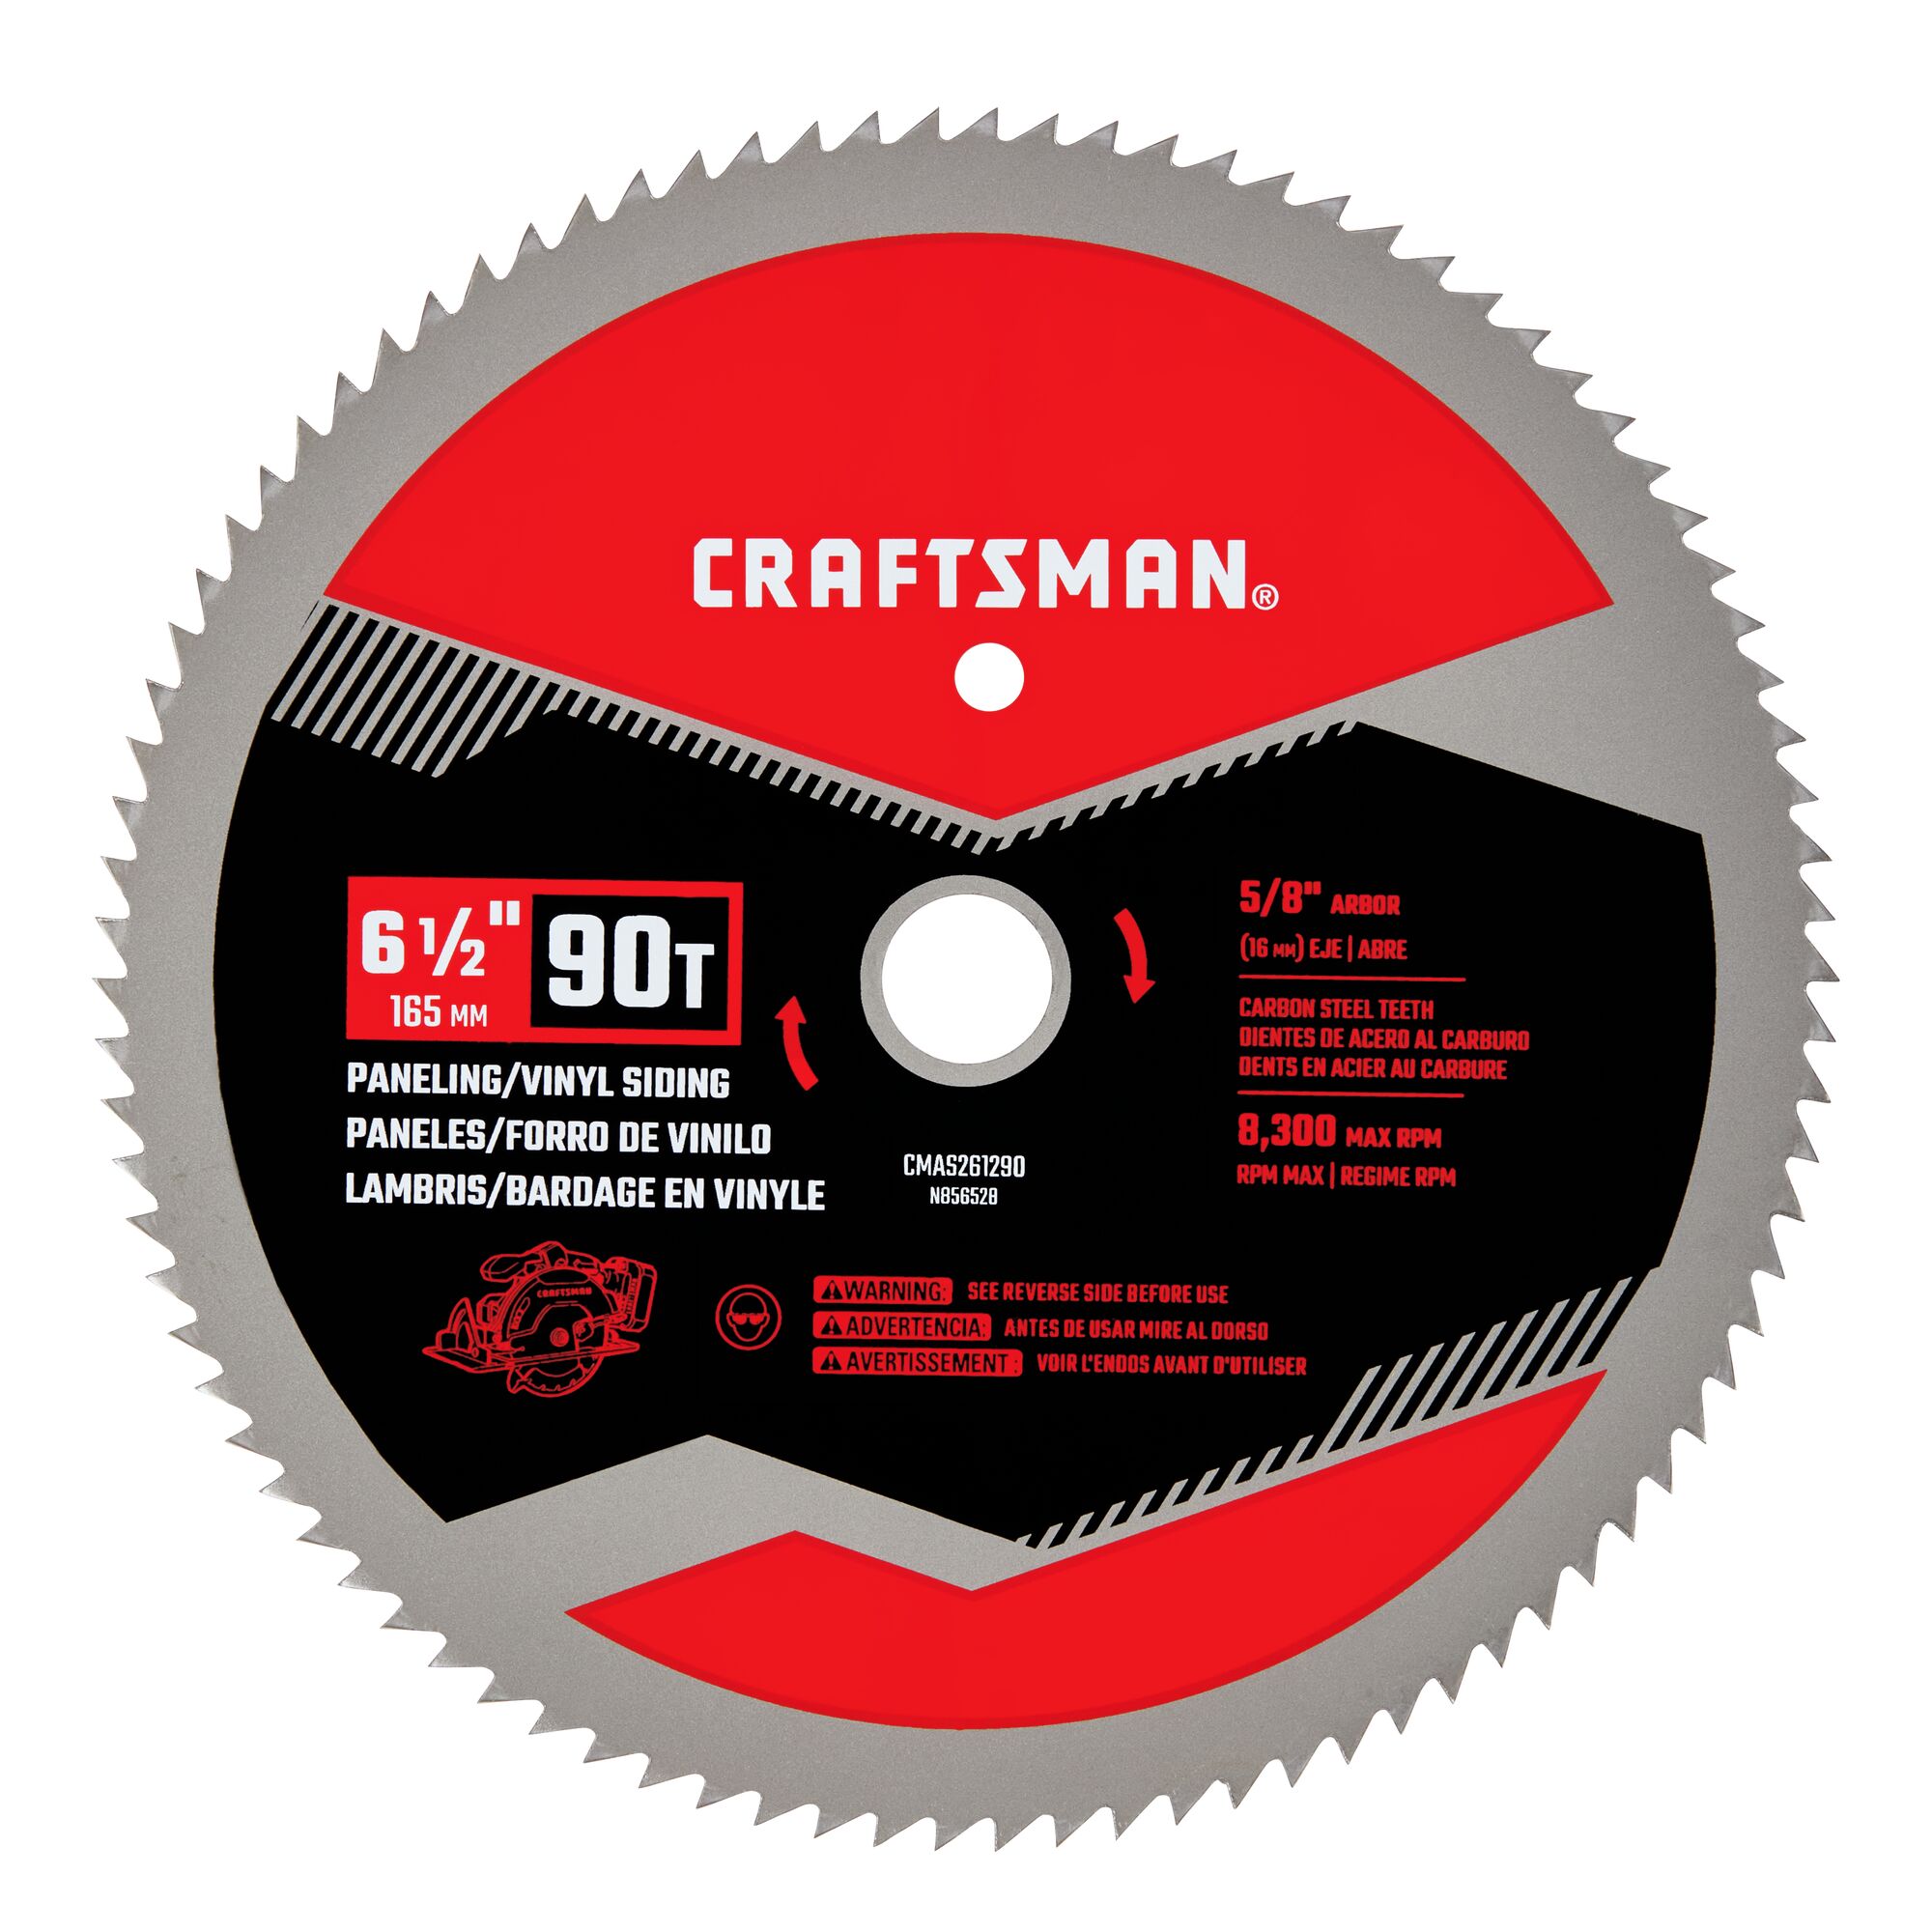 6 and a half inch 90 tooth paneling saw blade.